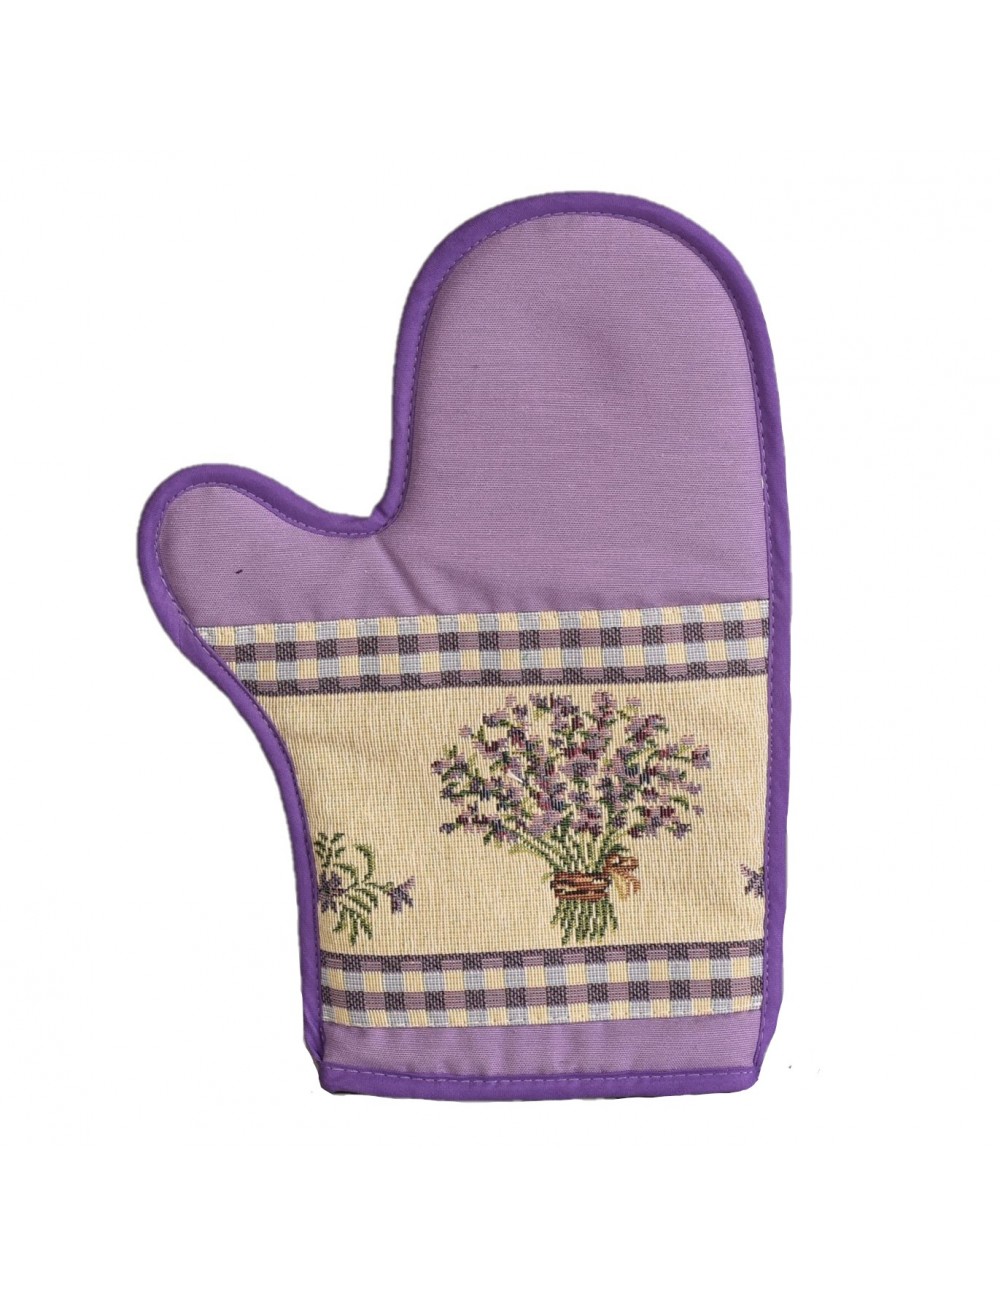 Oven glove with gobelin...